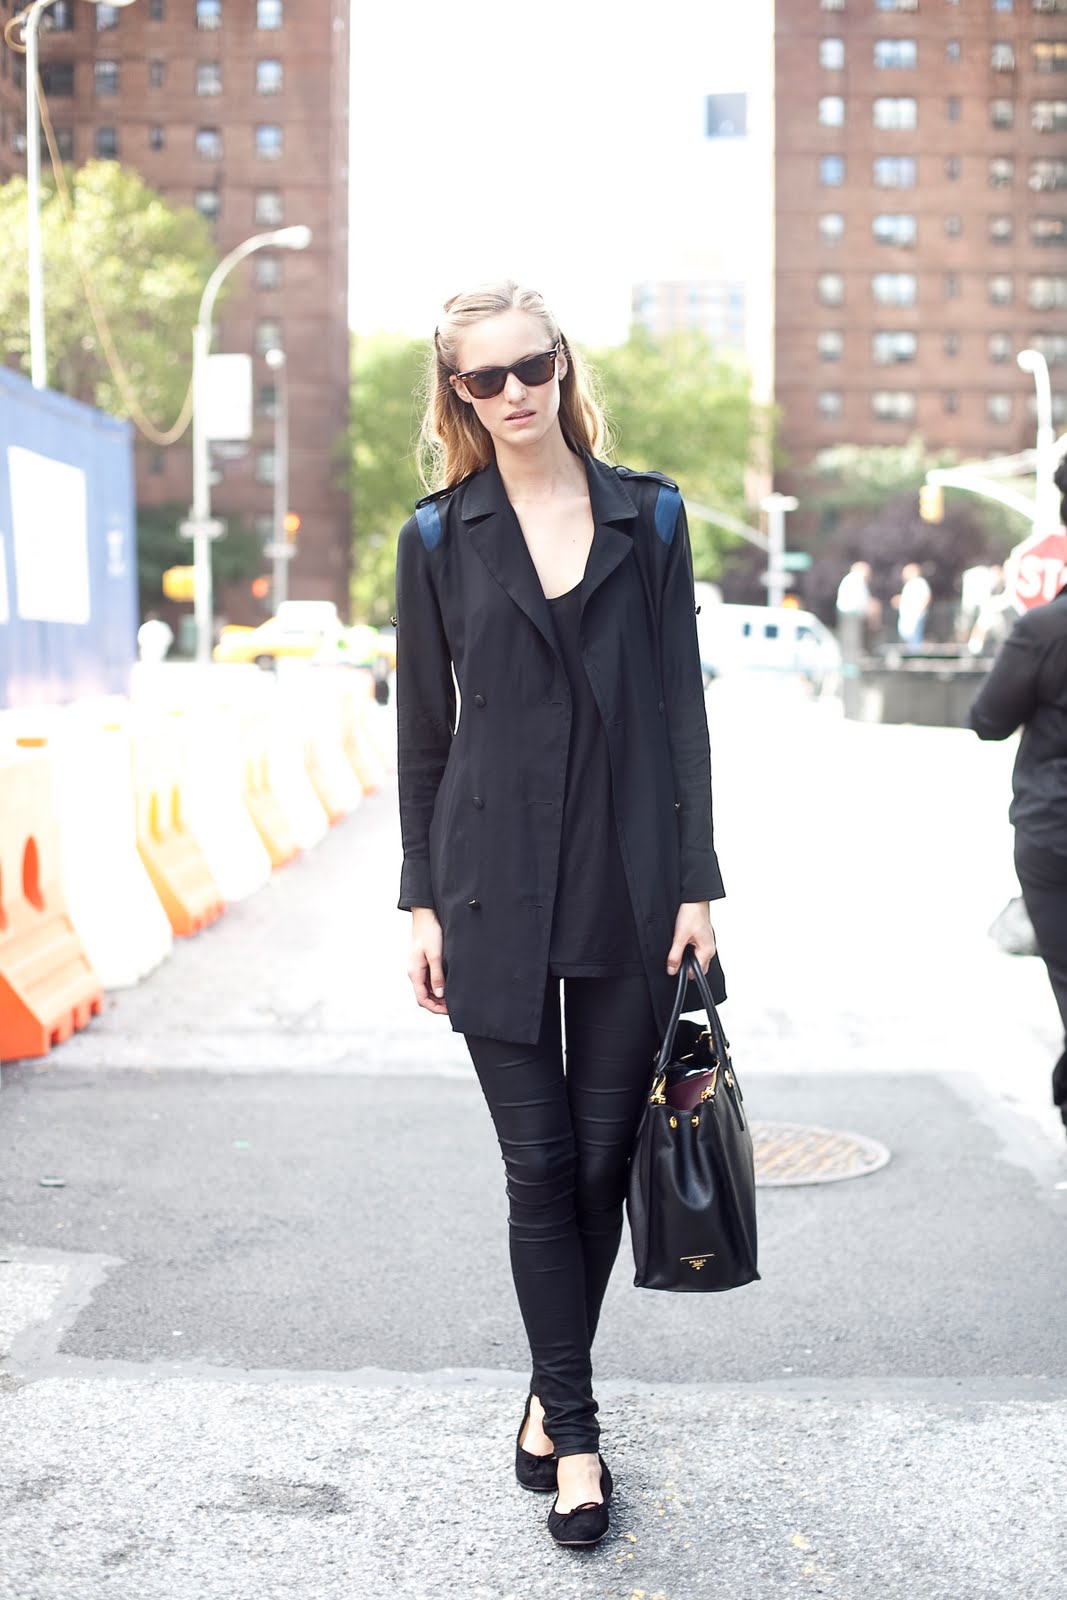 Theres Alexandersson (IMG, NY)